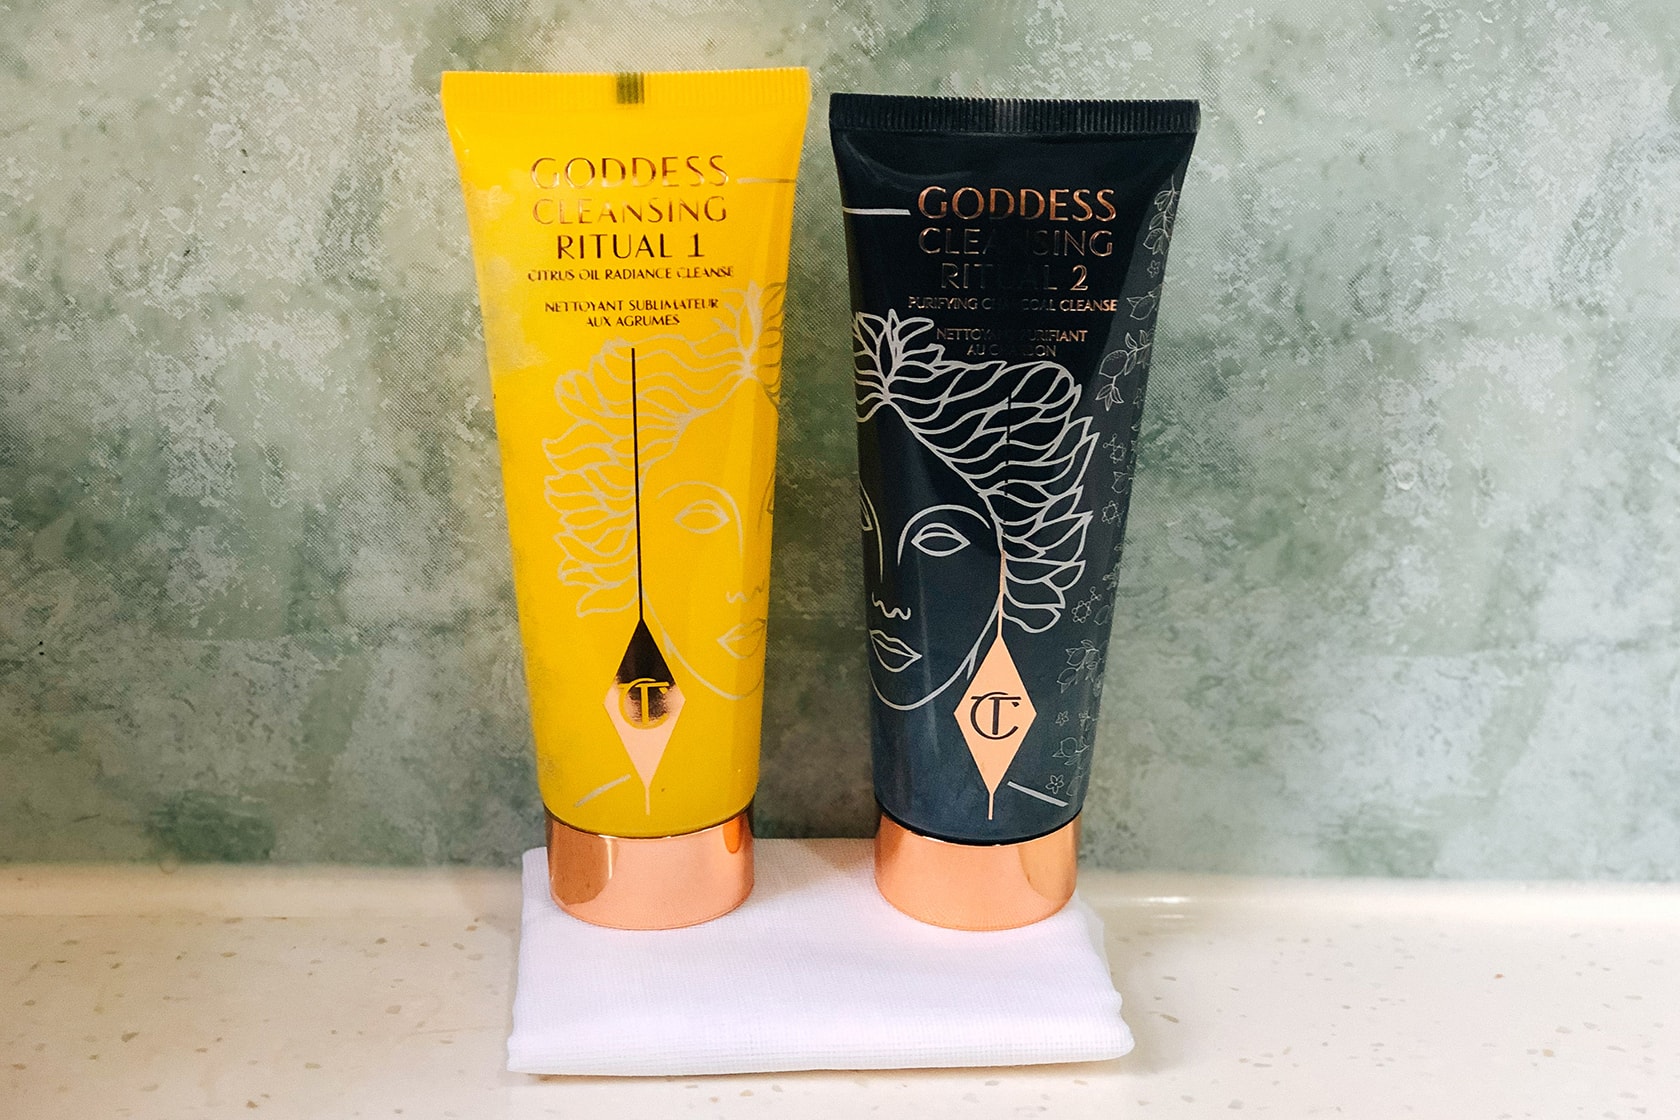 charlotte tilbury goddess cleansing ritual duo cleanser beauty skincare